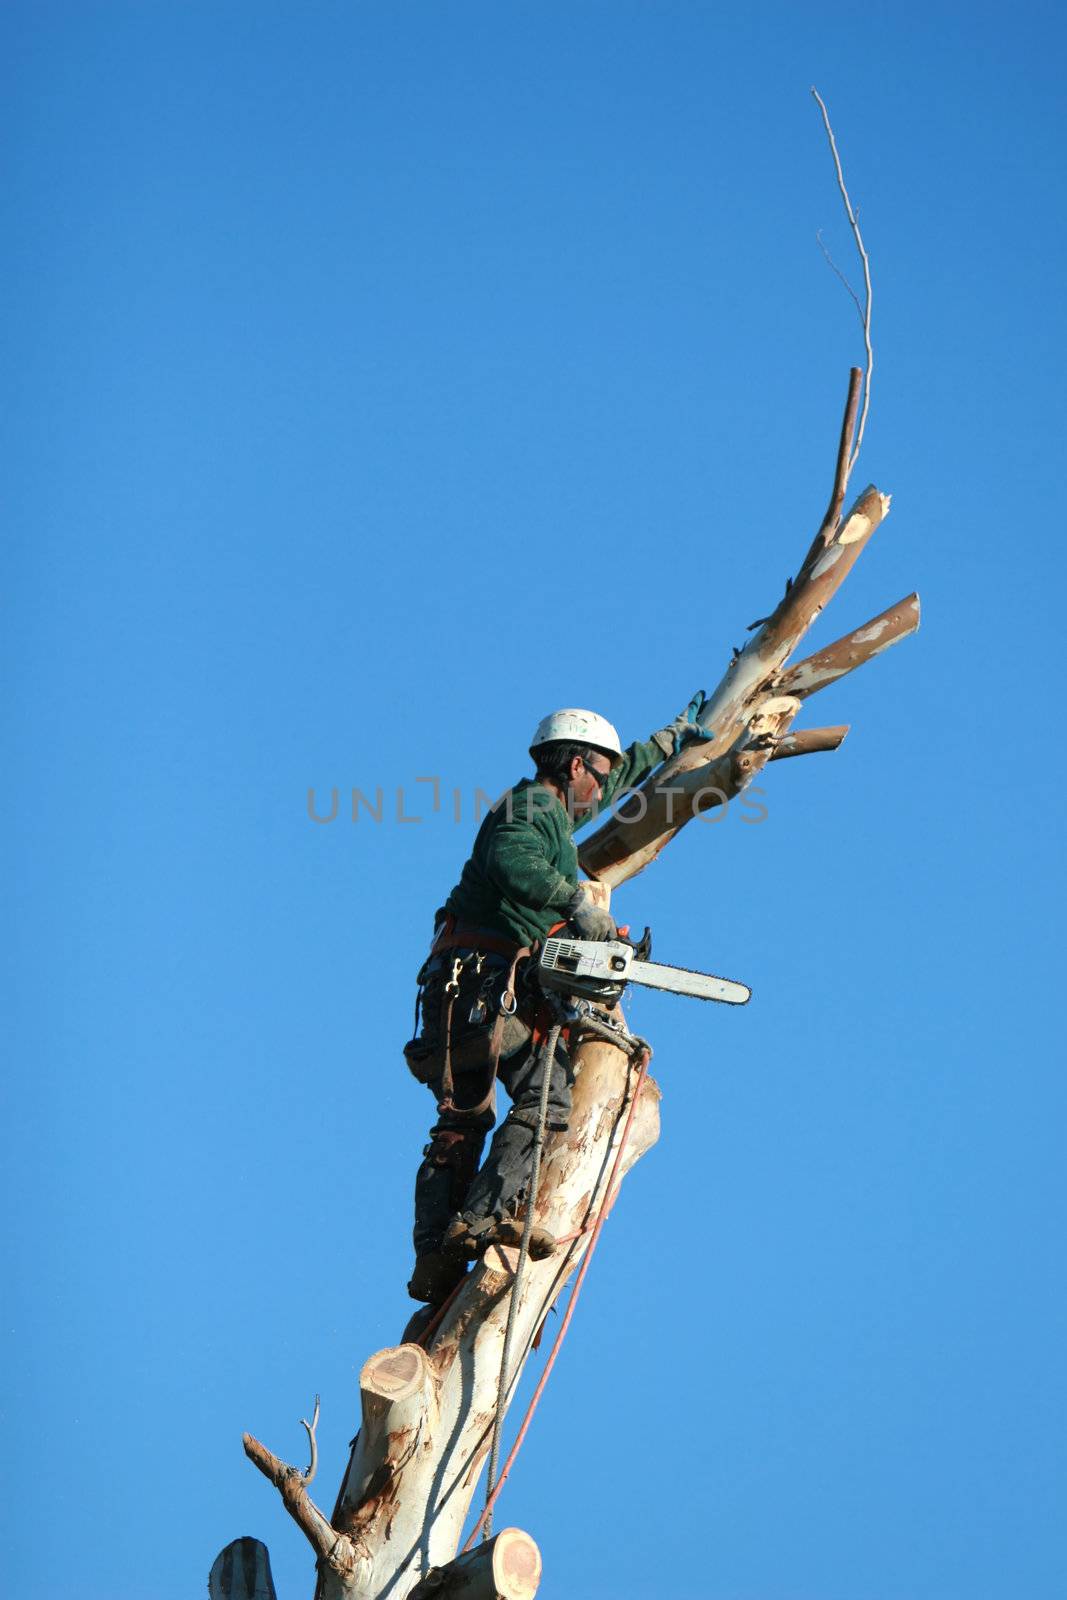 A large tree is being cut down by a man suspended ropes. All that remains now is the trunk of the tree.